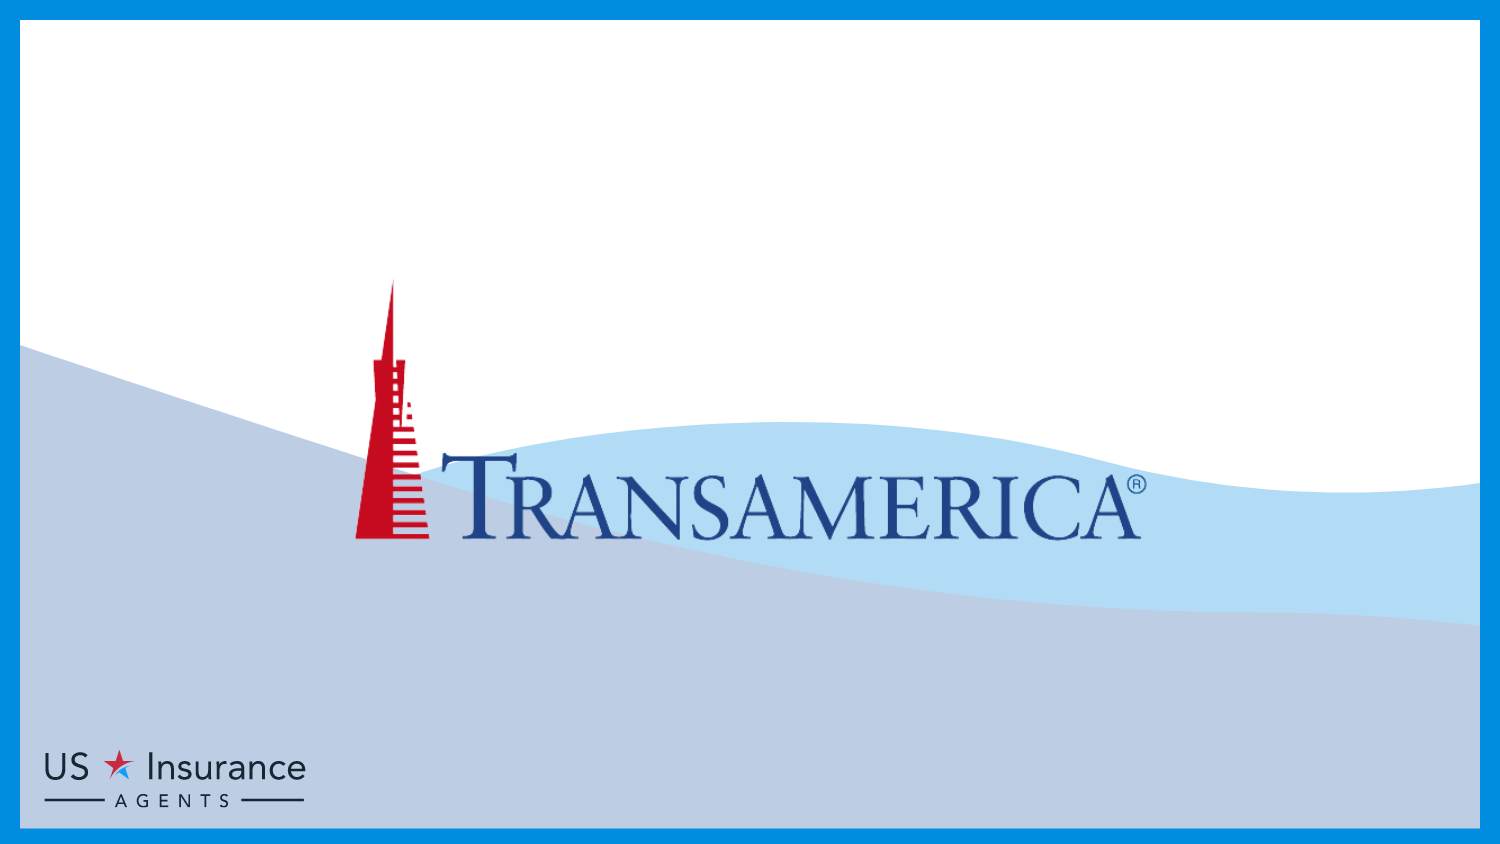 Transamerica: Best Life Insurance for People With Down Syndrome